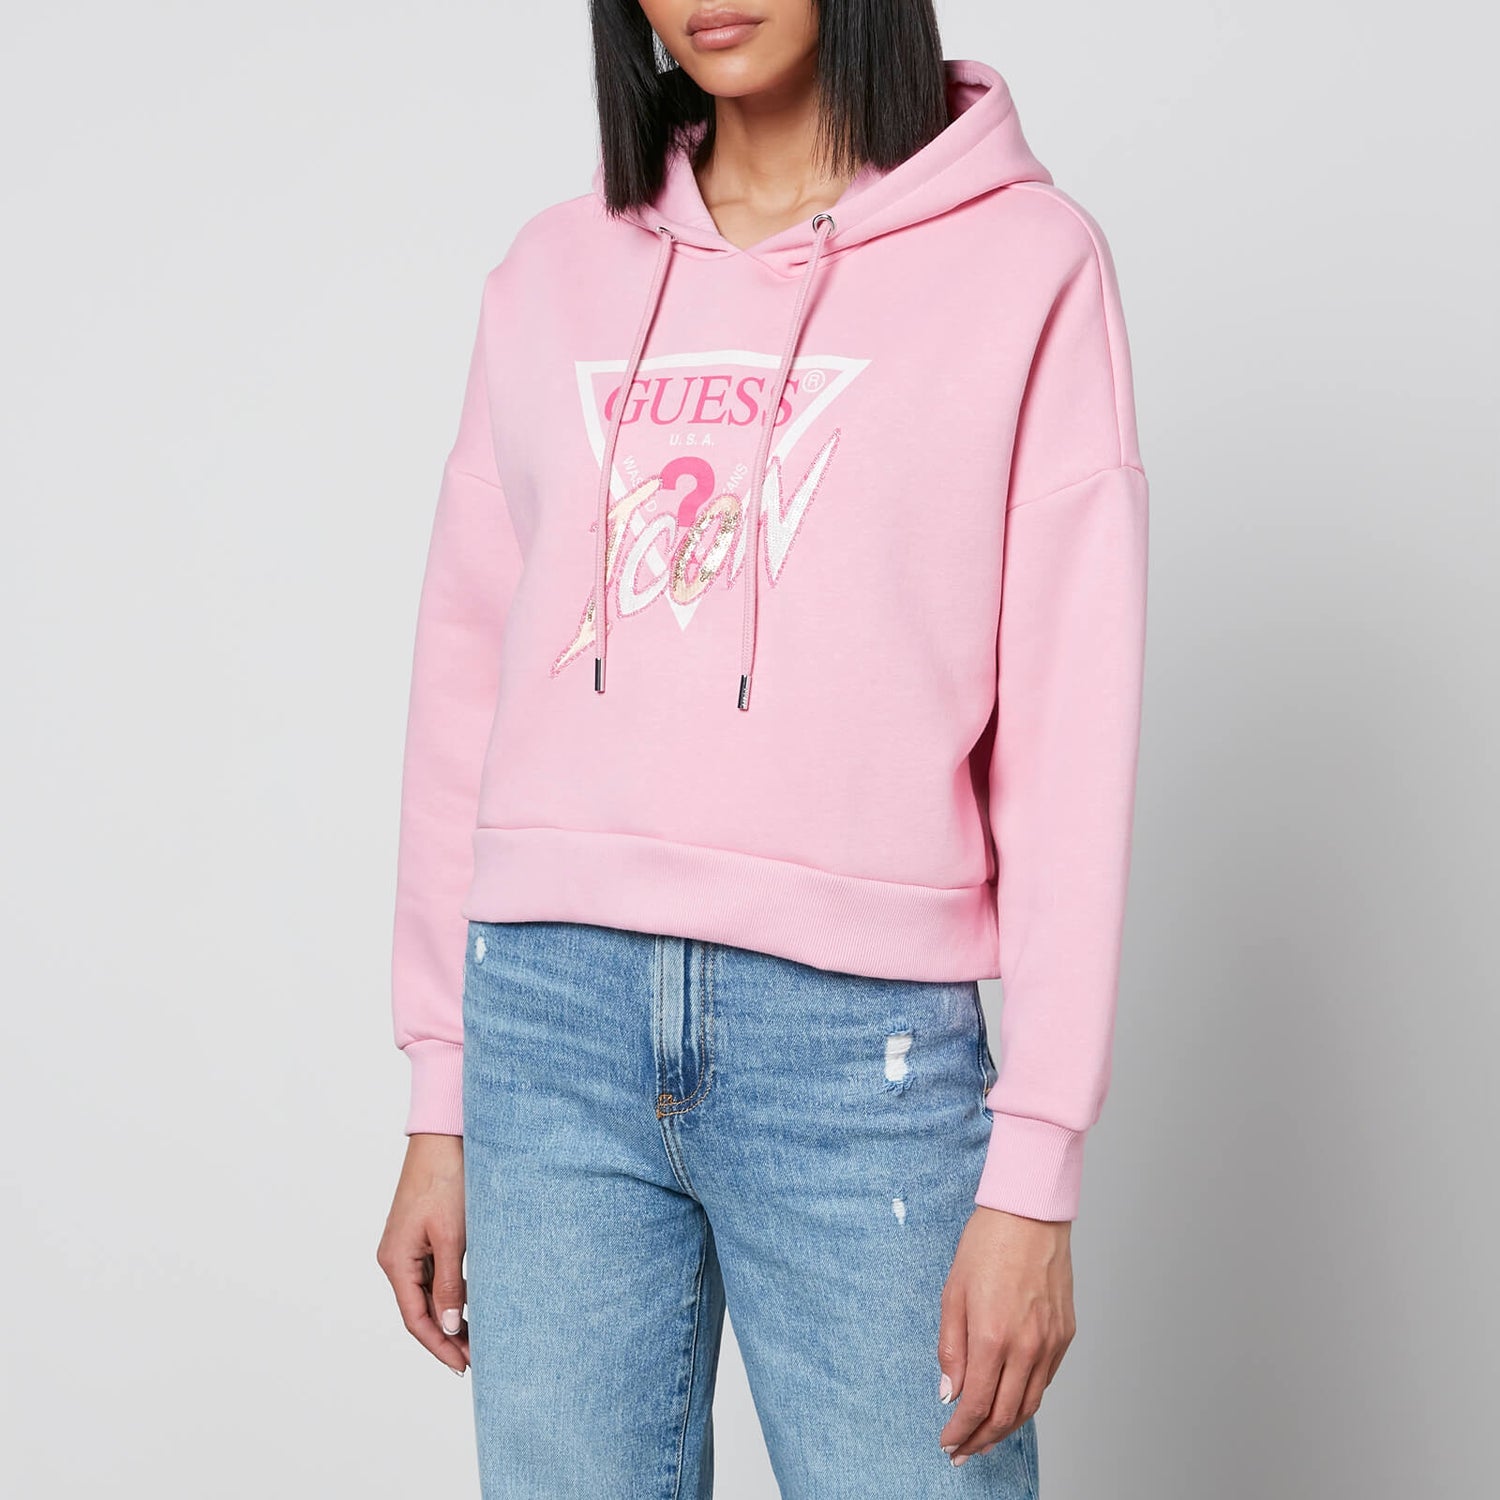 Guess Hoody Icon Cotton-Blend Hoodie - XL